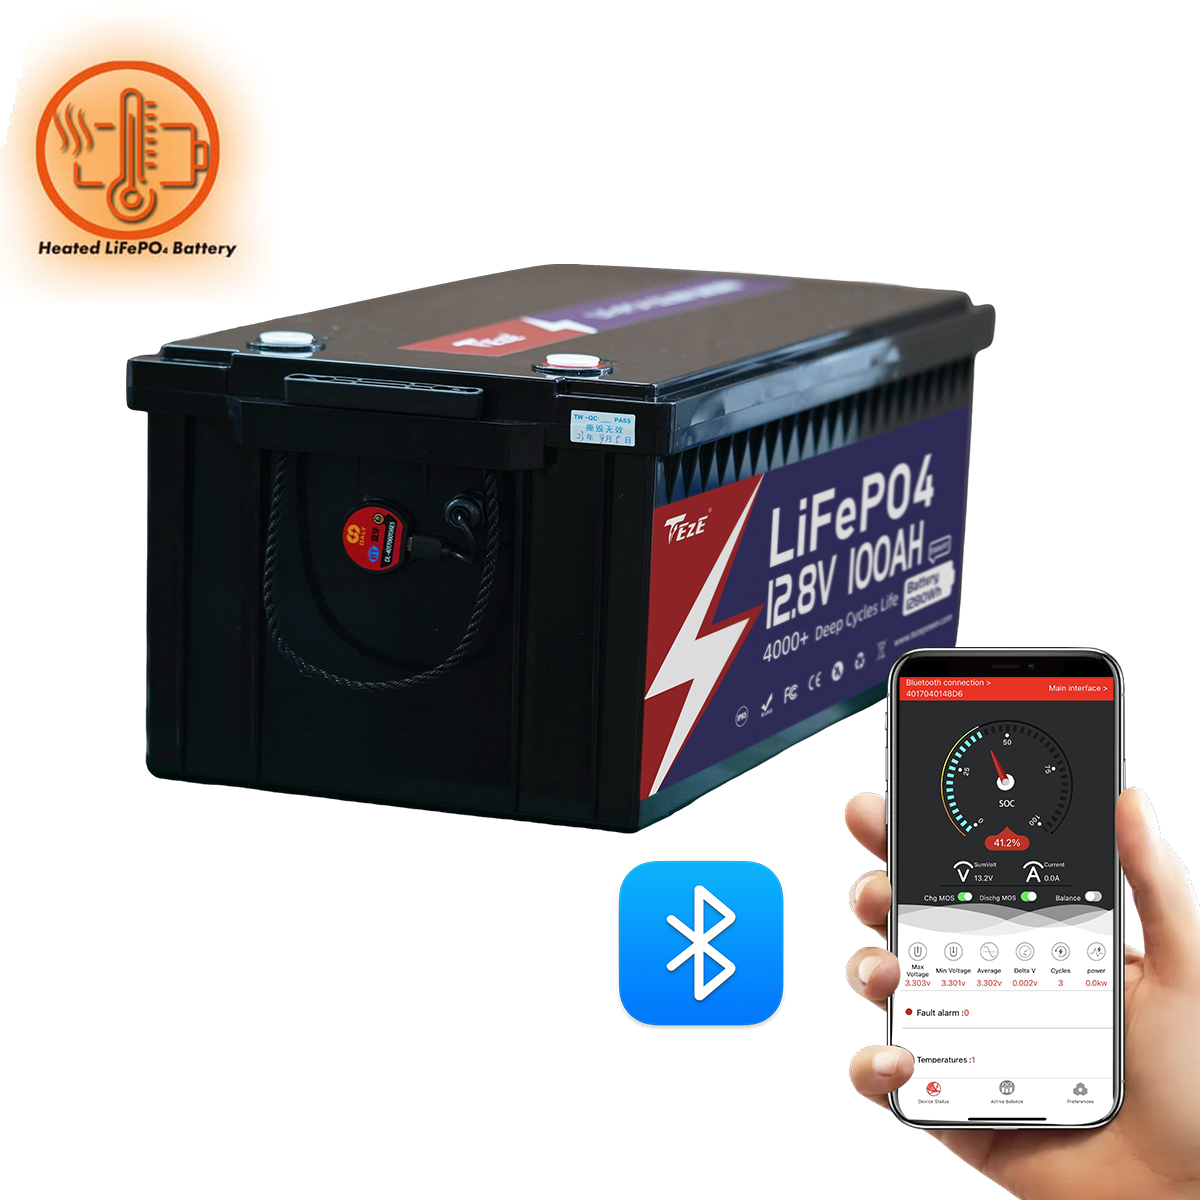 NEW-TezePower 12V100Ah LiFePO4 Battery with Bluetooth, Self-heating and Active Balancer, Built-in 100A Daly BMS (Bluetooth External Version)-TezePower